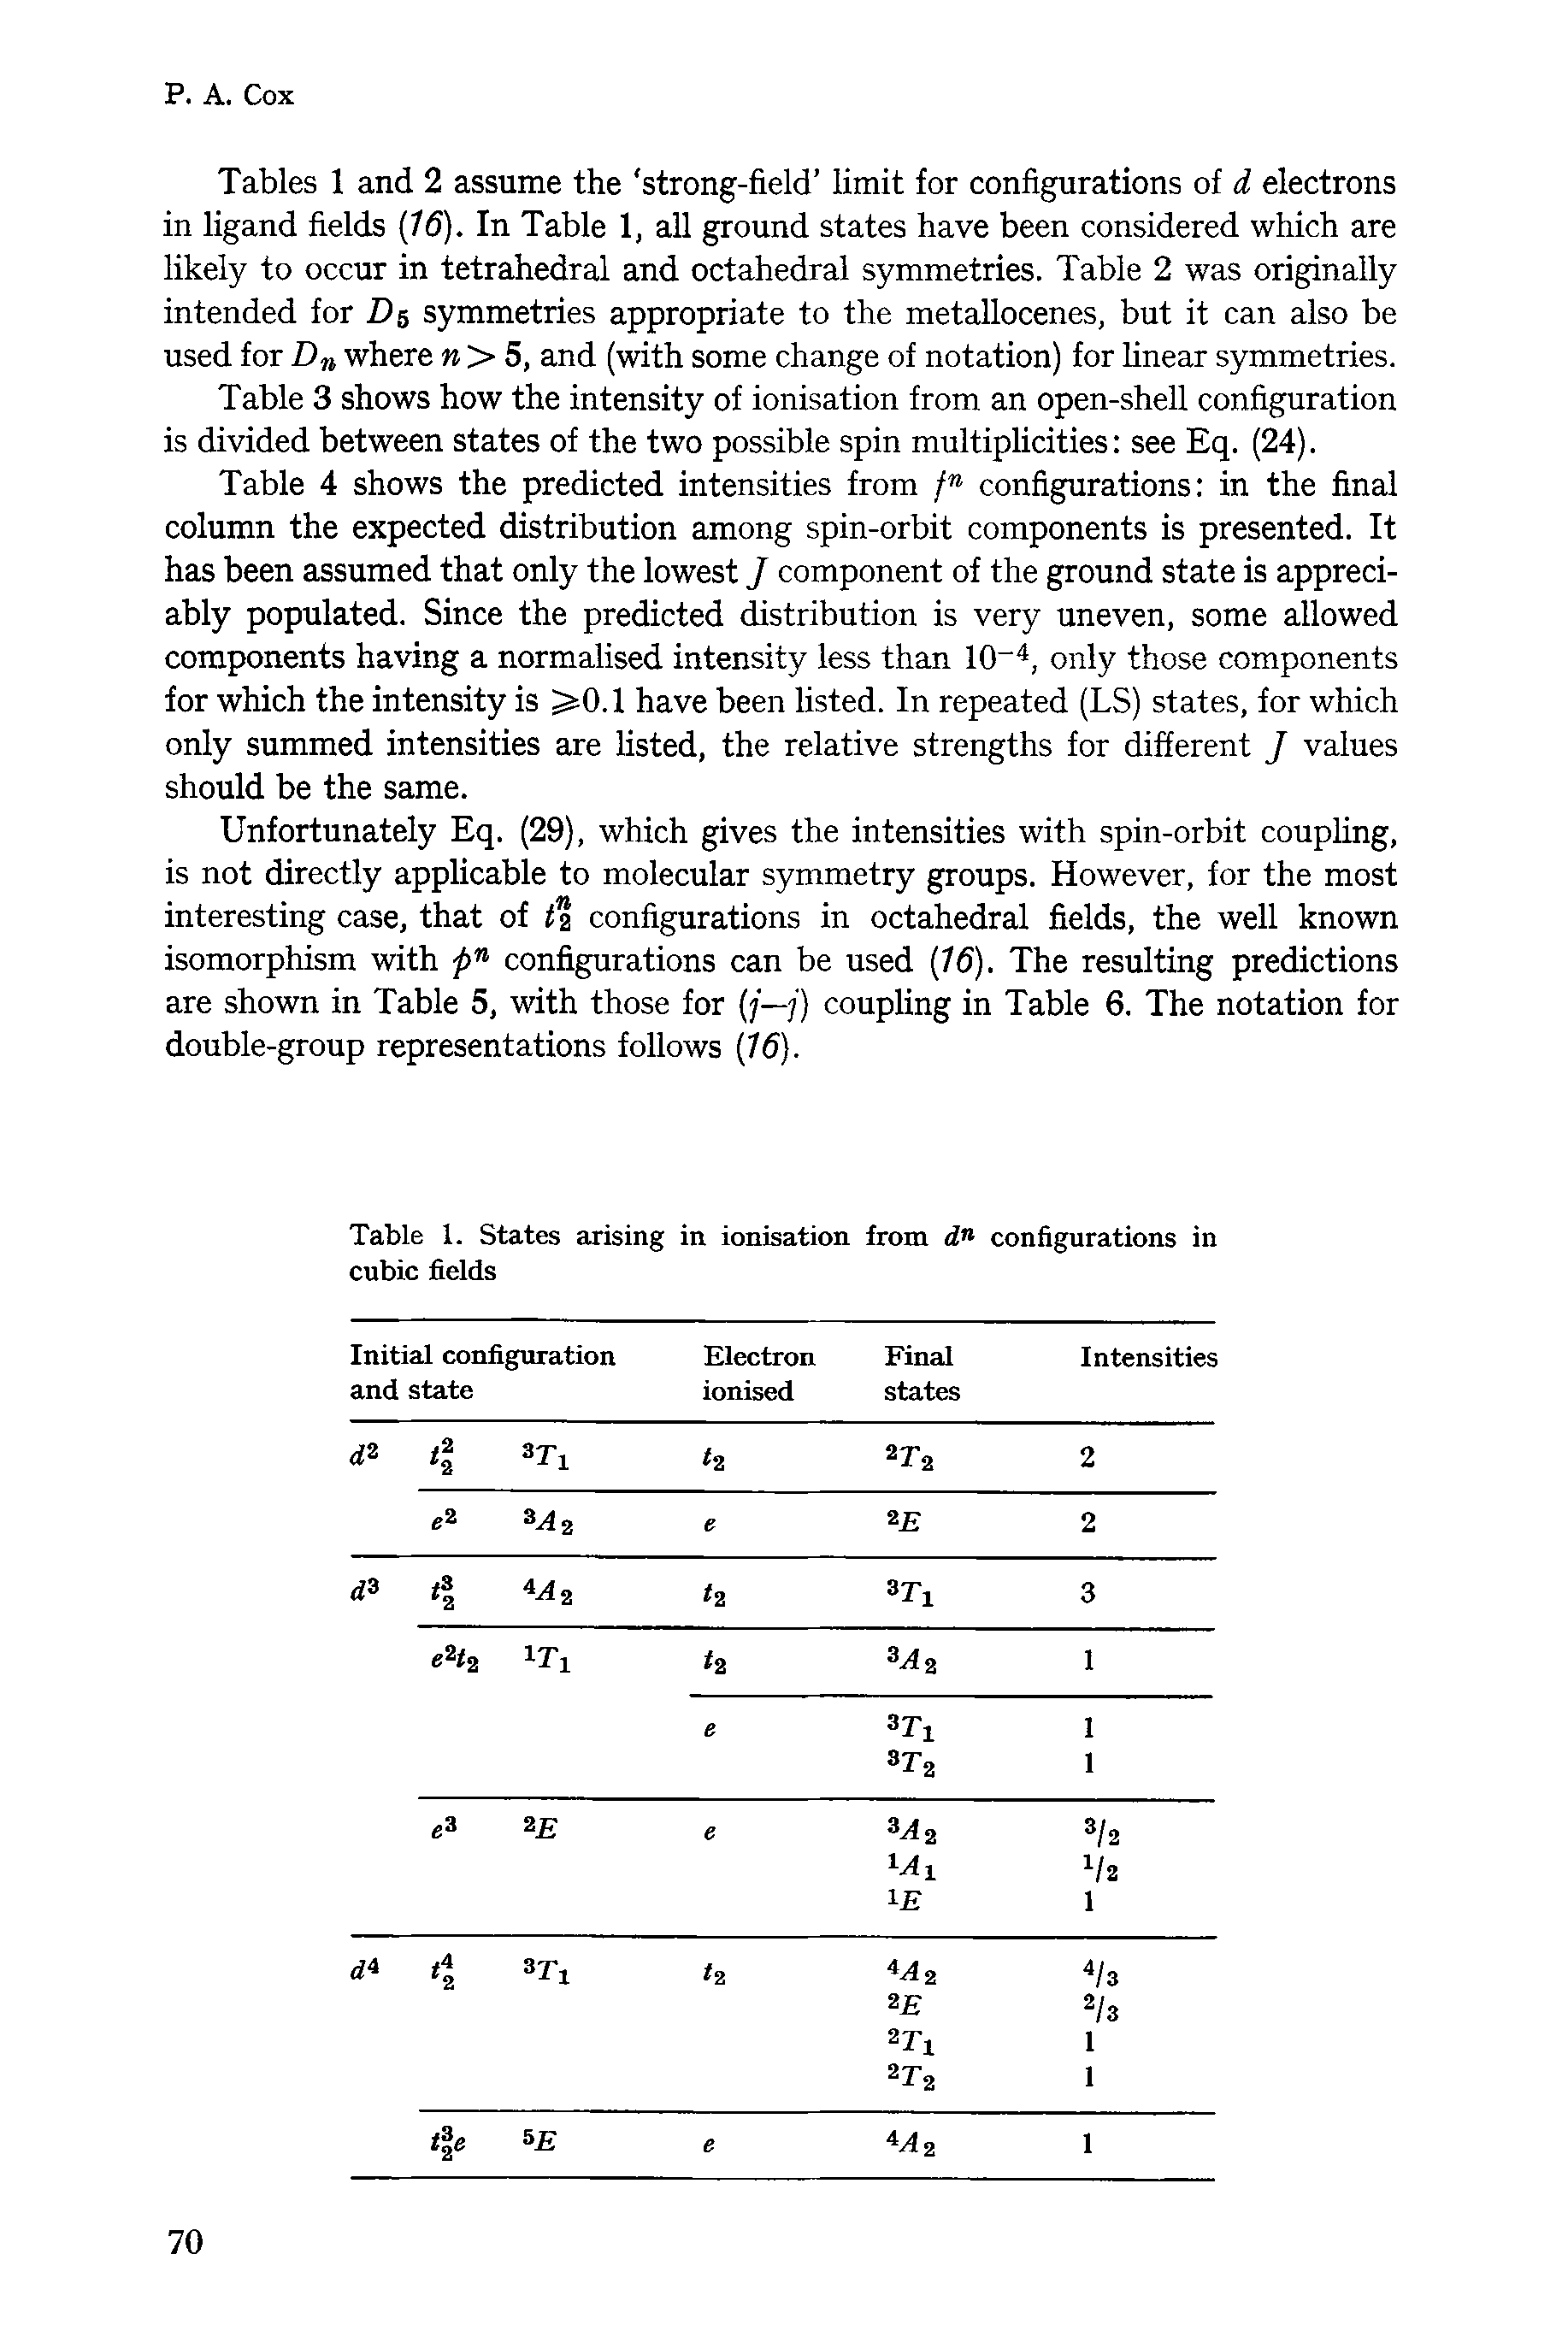 Tables 1 and 2 assume the strong-field limit for configurations of d electrons in ligand fields (16). In Table 1, all ground states have been considered which are likely to occur in tetrahedral and octahedral symmetries. Table 2 was originally intended for D 5 symmetries appropriate to the metallocenes, but it can also be used for Dn where n > 5, and (with some change of notation) for linear symmetries.